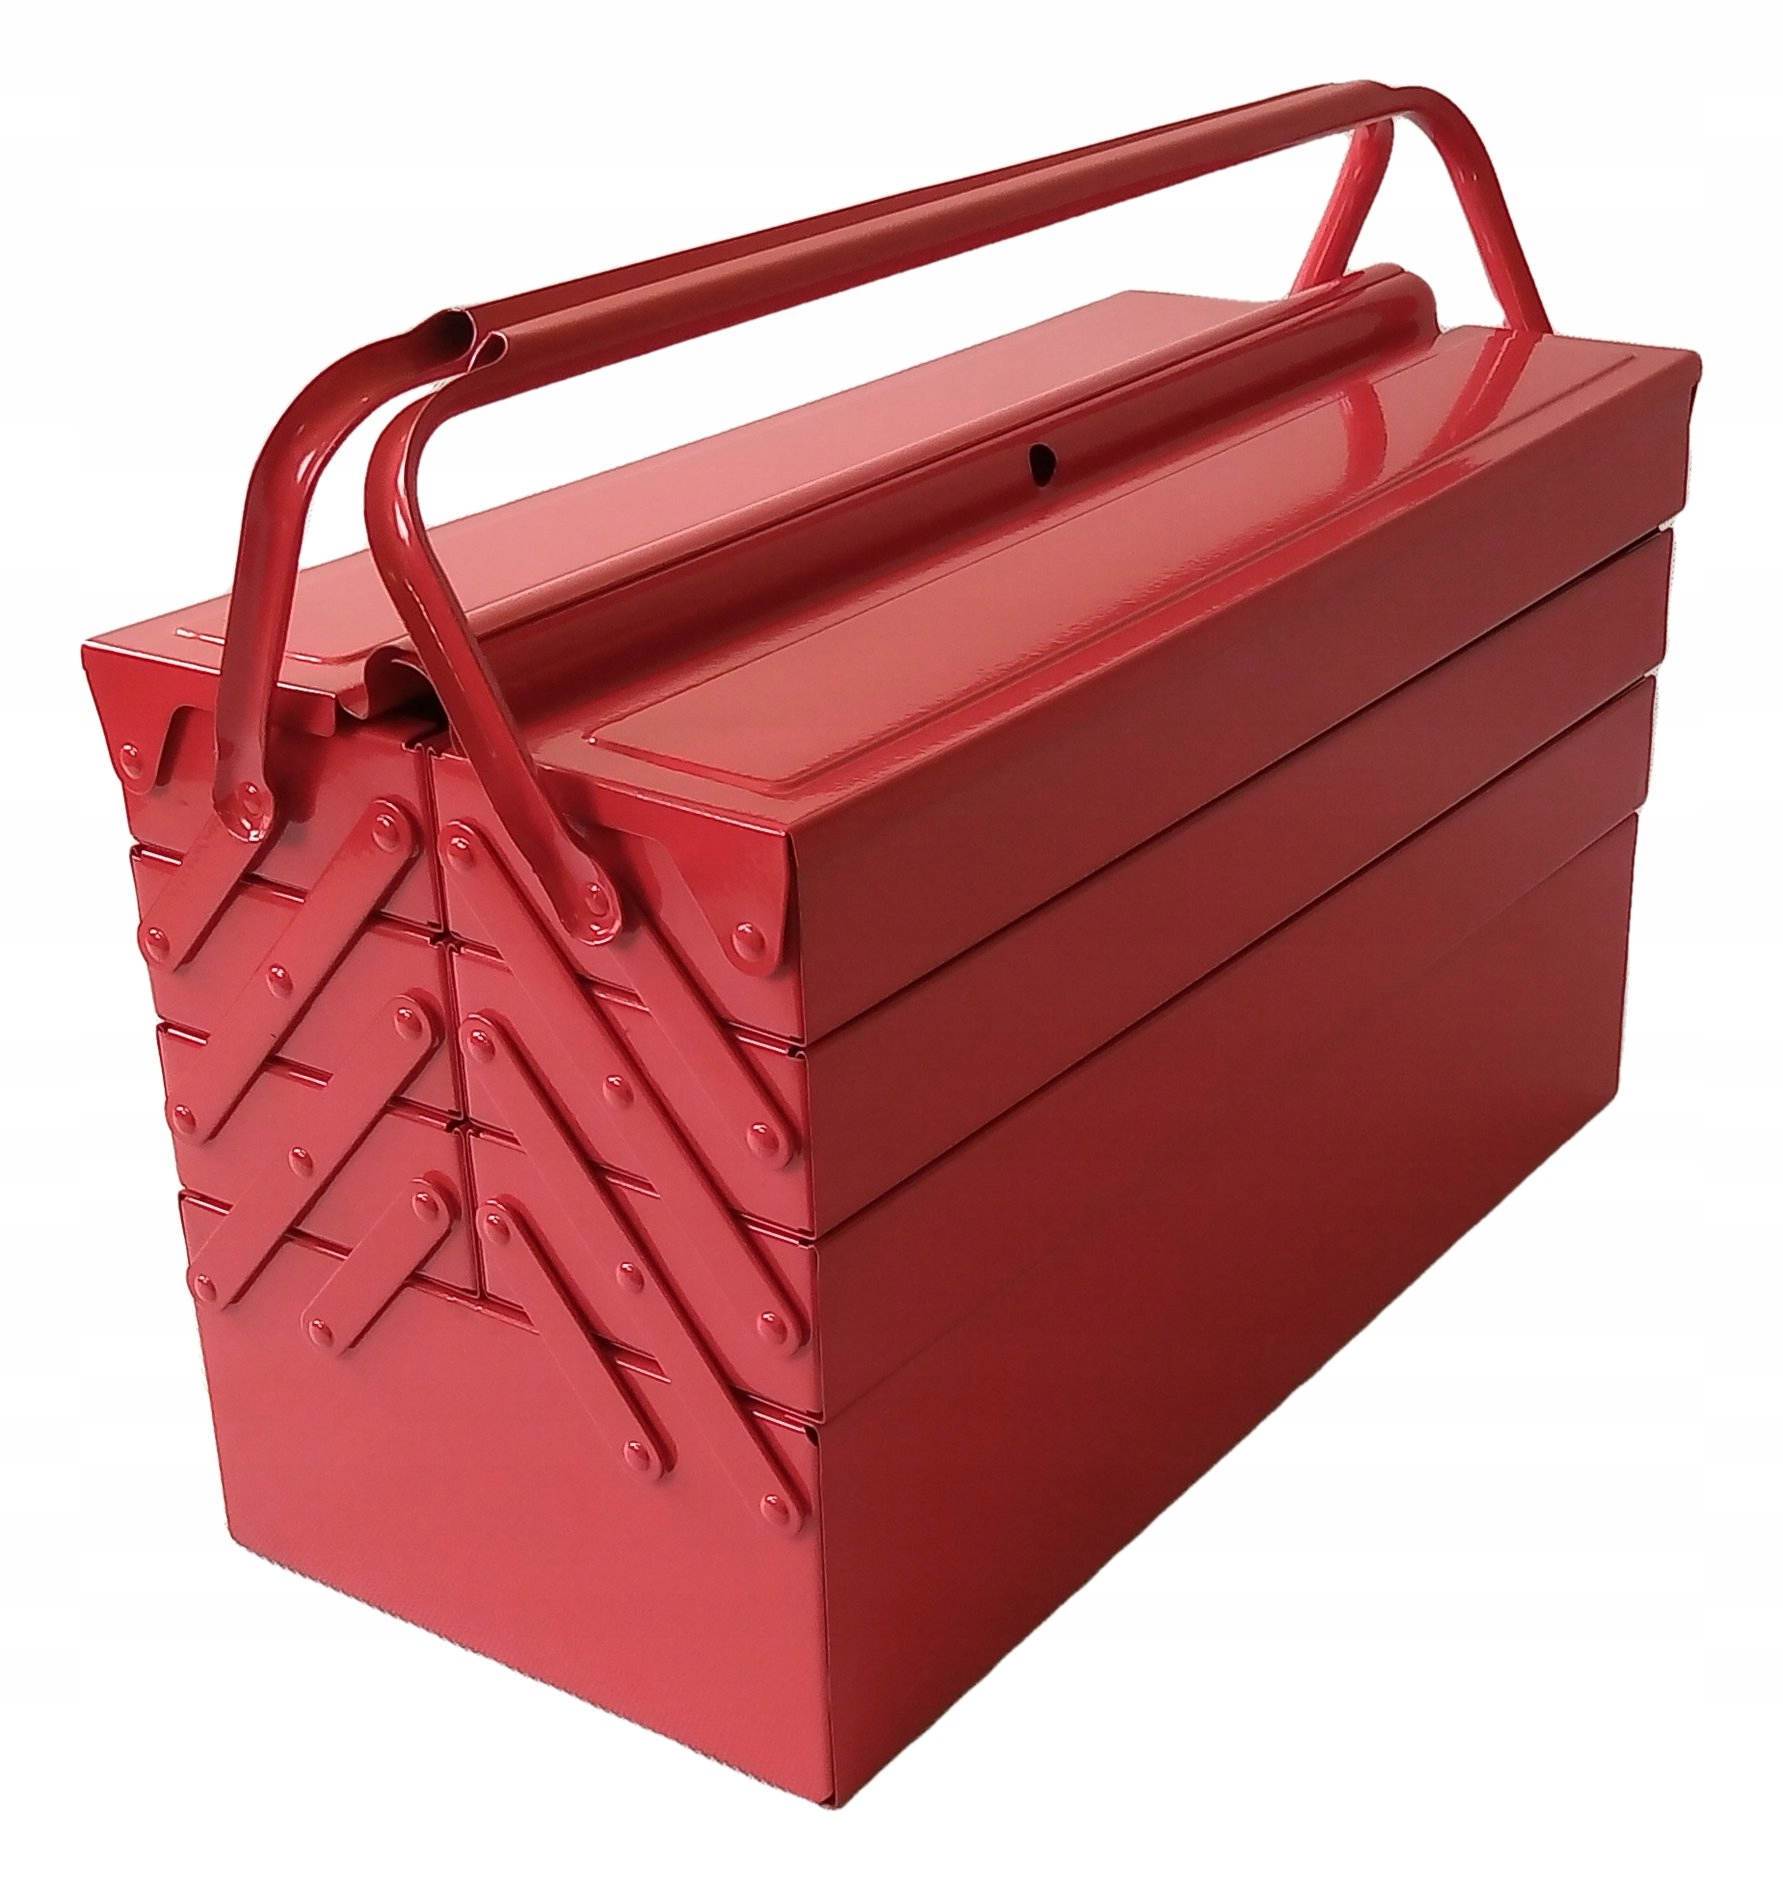 RED STEEL METAL Tool Box Cantilever WITH 7 Tray BOX 17"  430mm 